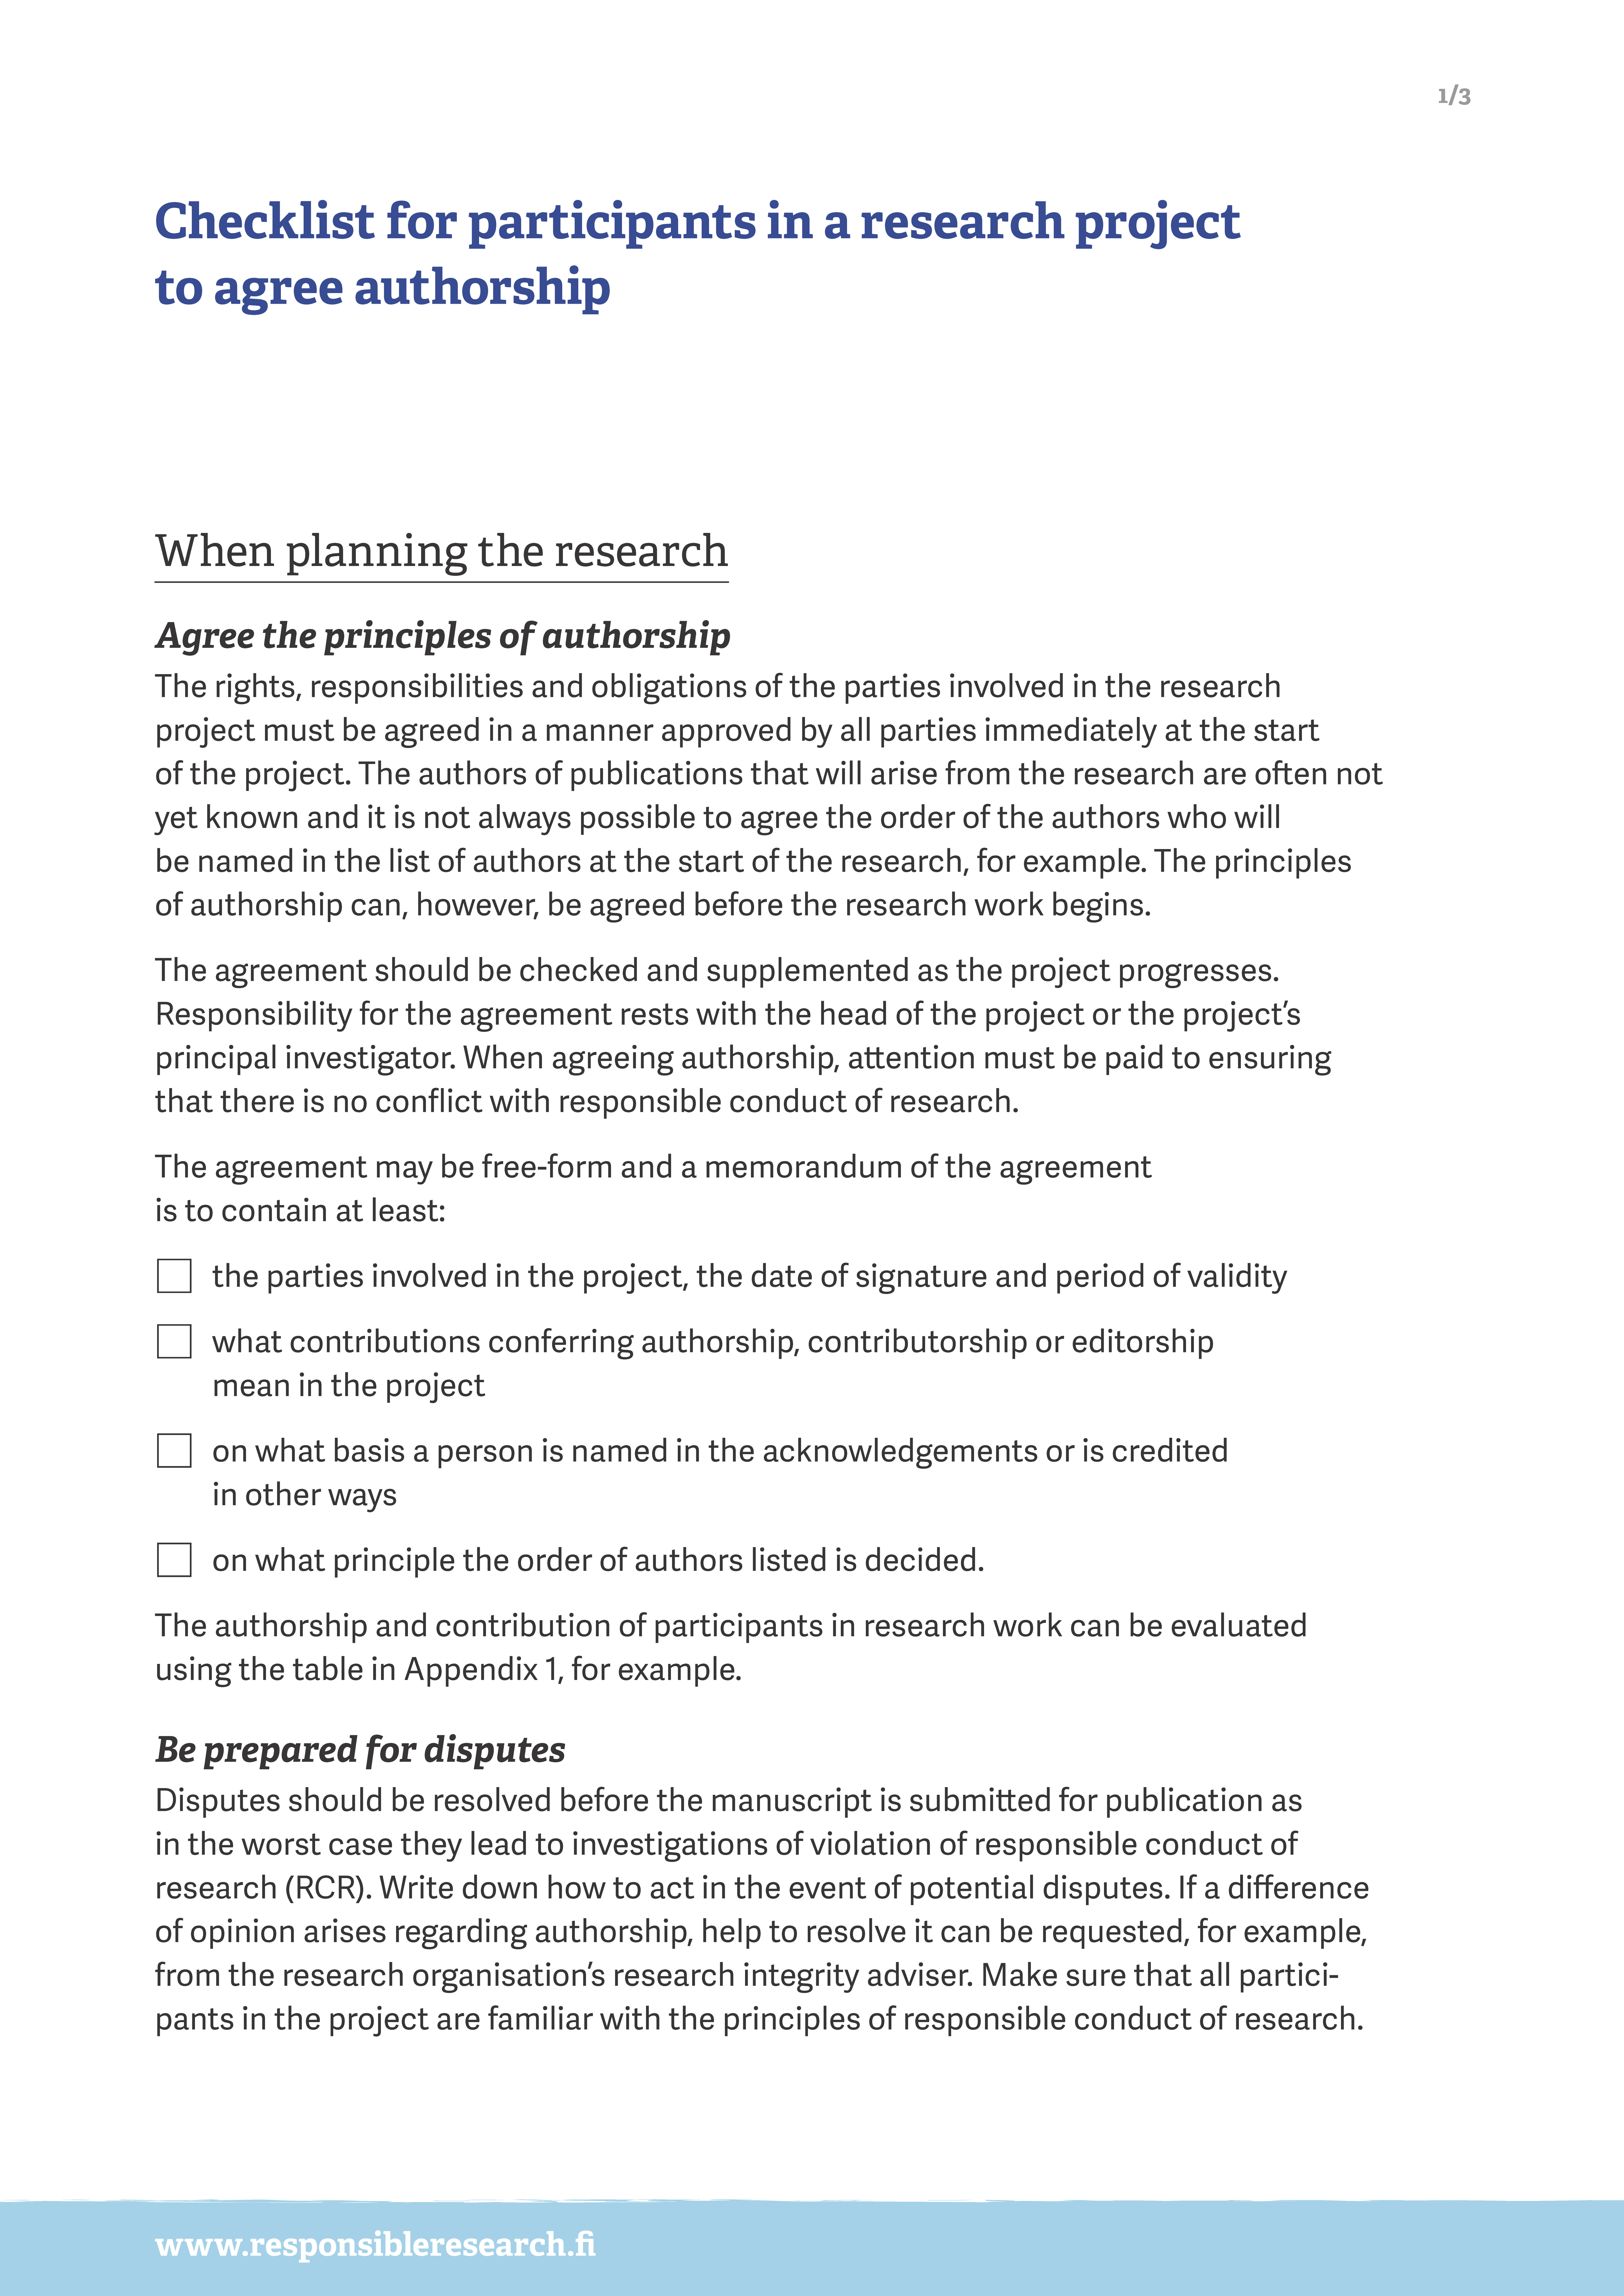 Checklist for agreeing on authorship 1